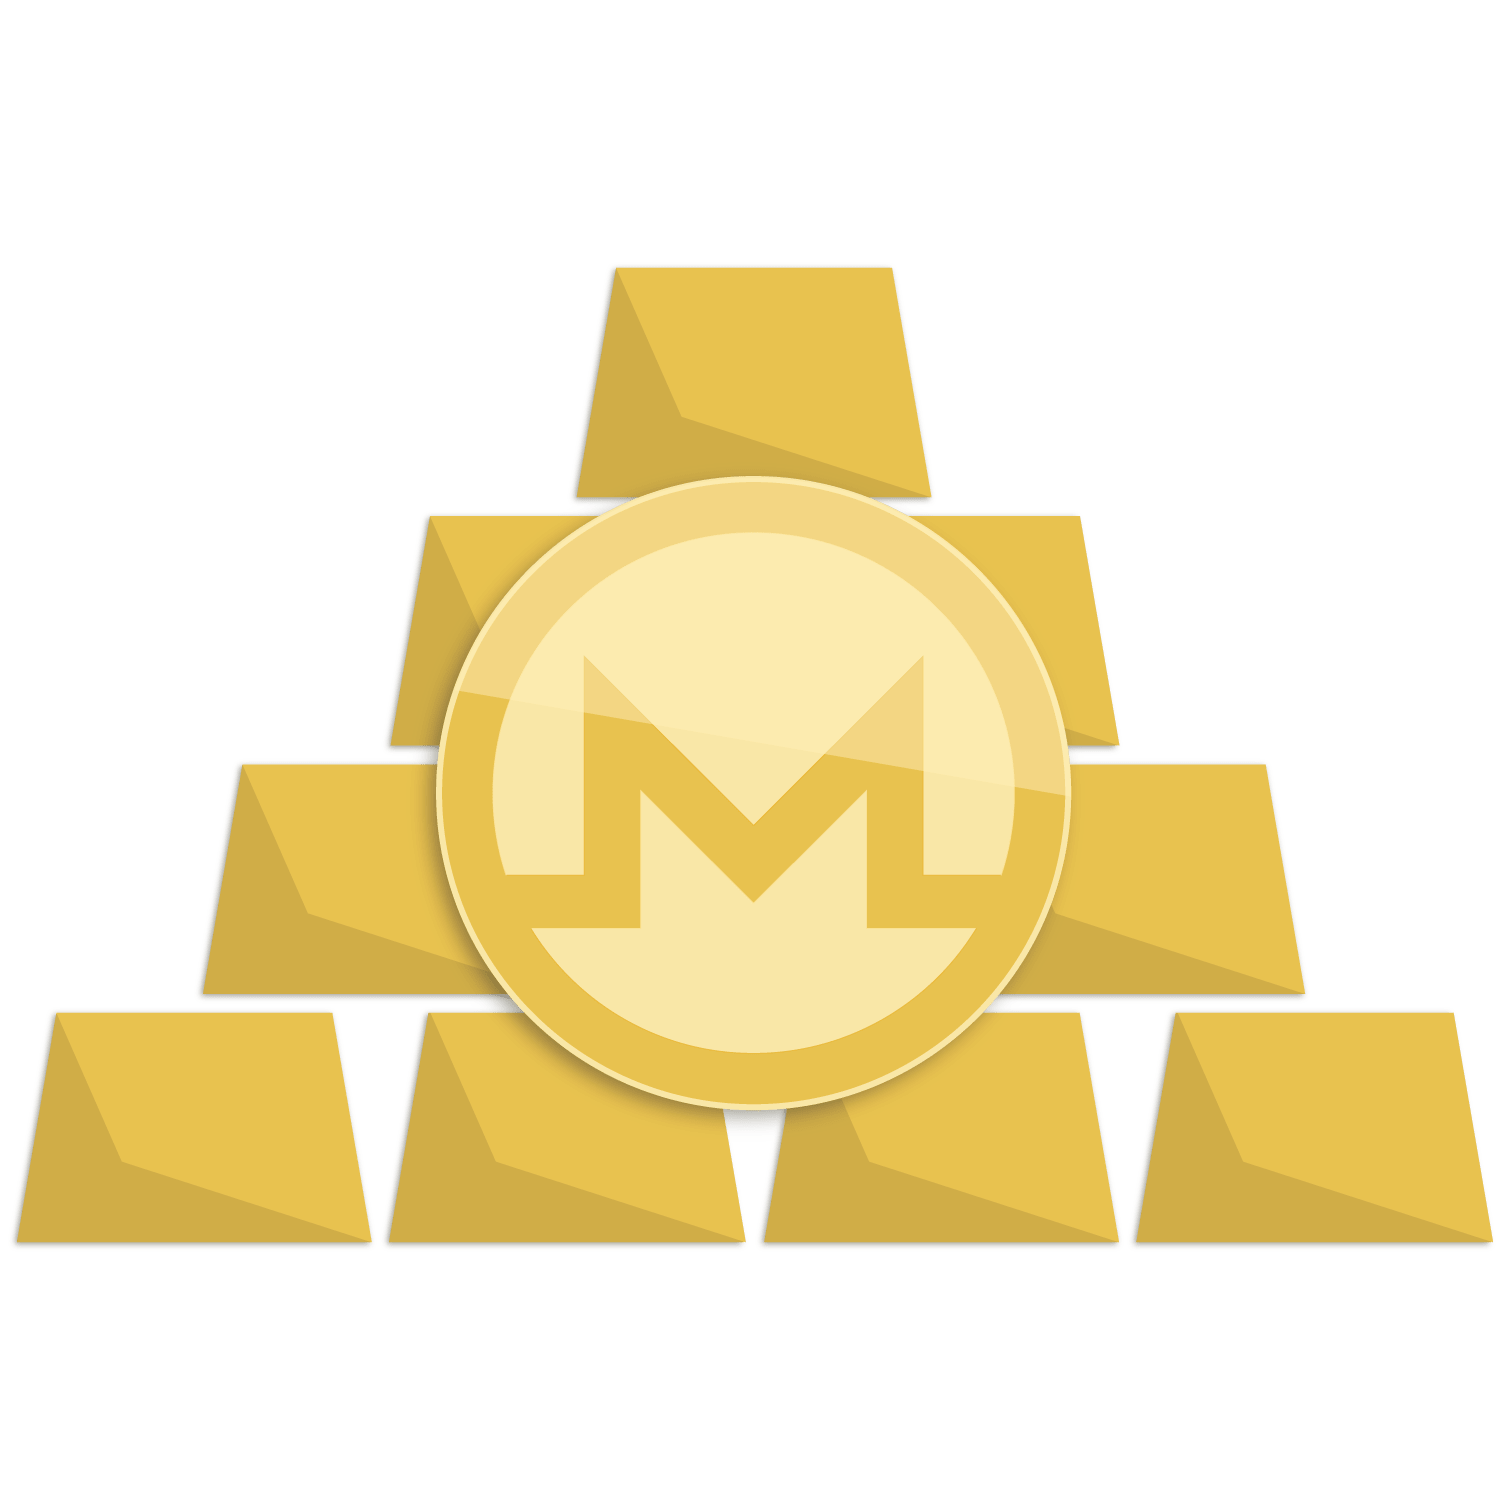 gold bars pyramid stacked with Monero symbol on the front